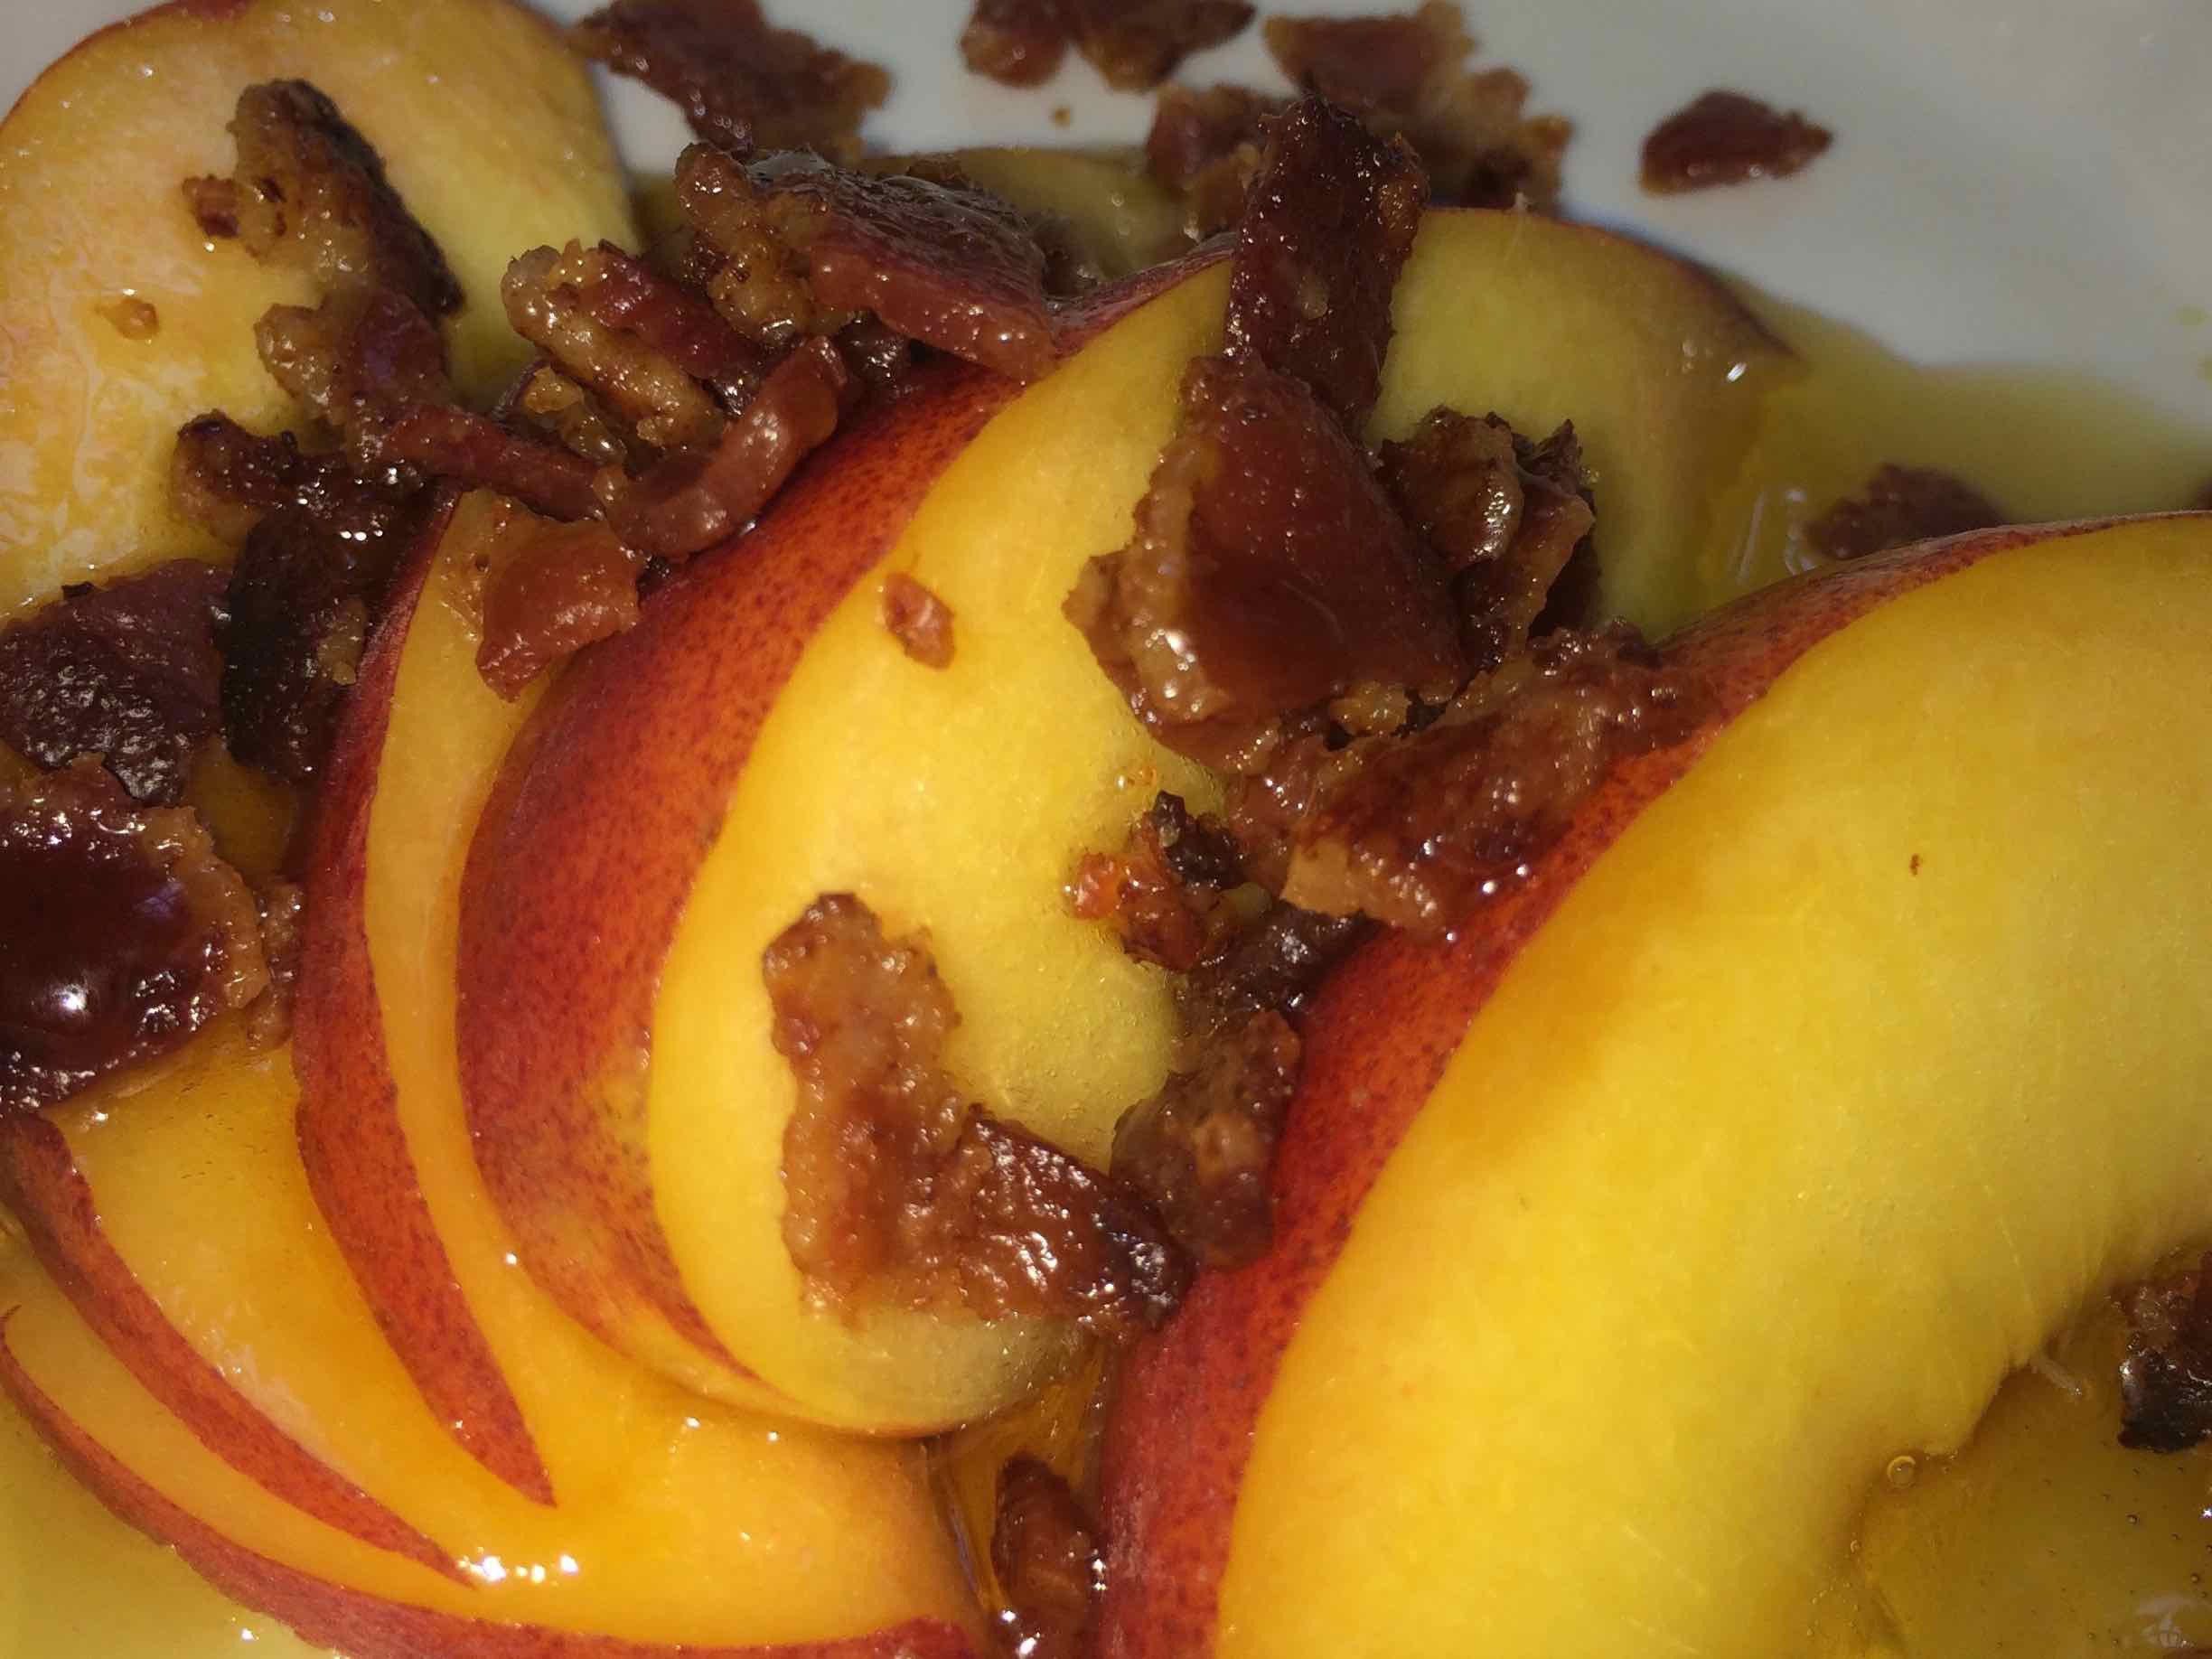 Breakfast at Coach Stop Inn Bed and Breakfast - Peach slices with candied bacon bits